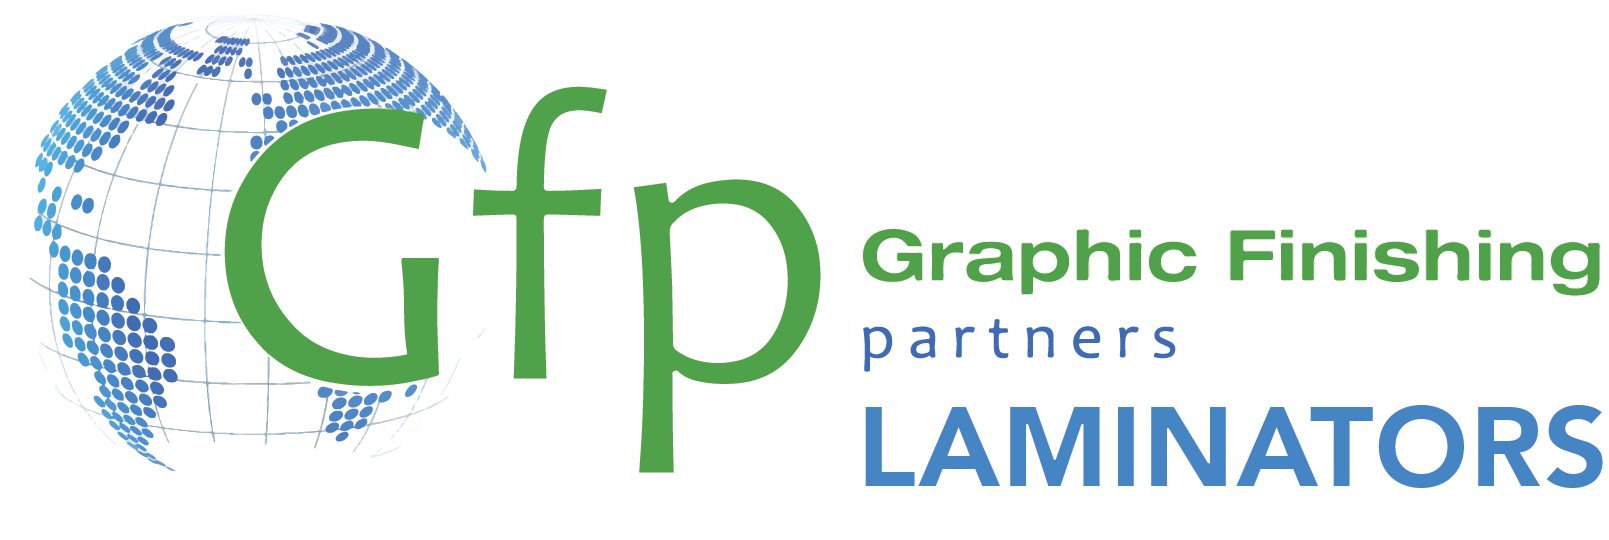 gfp-logo.png